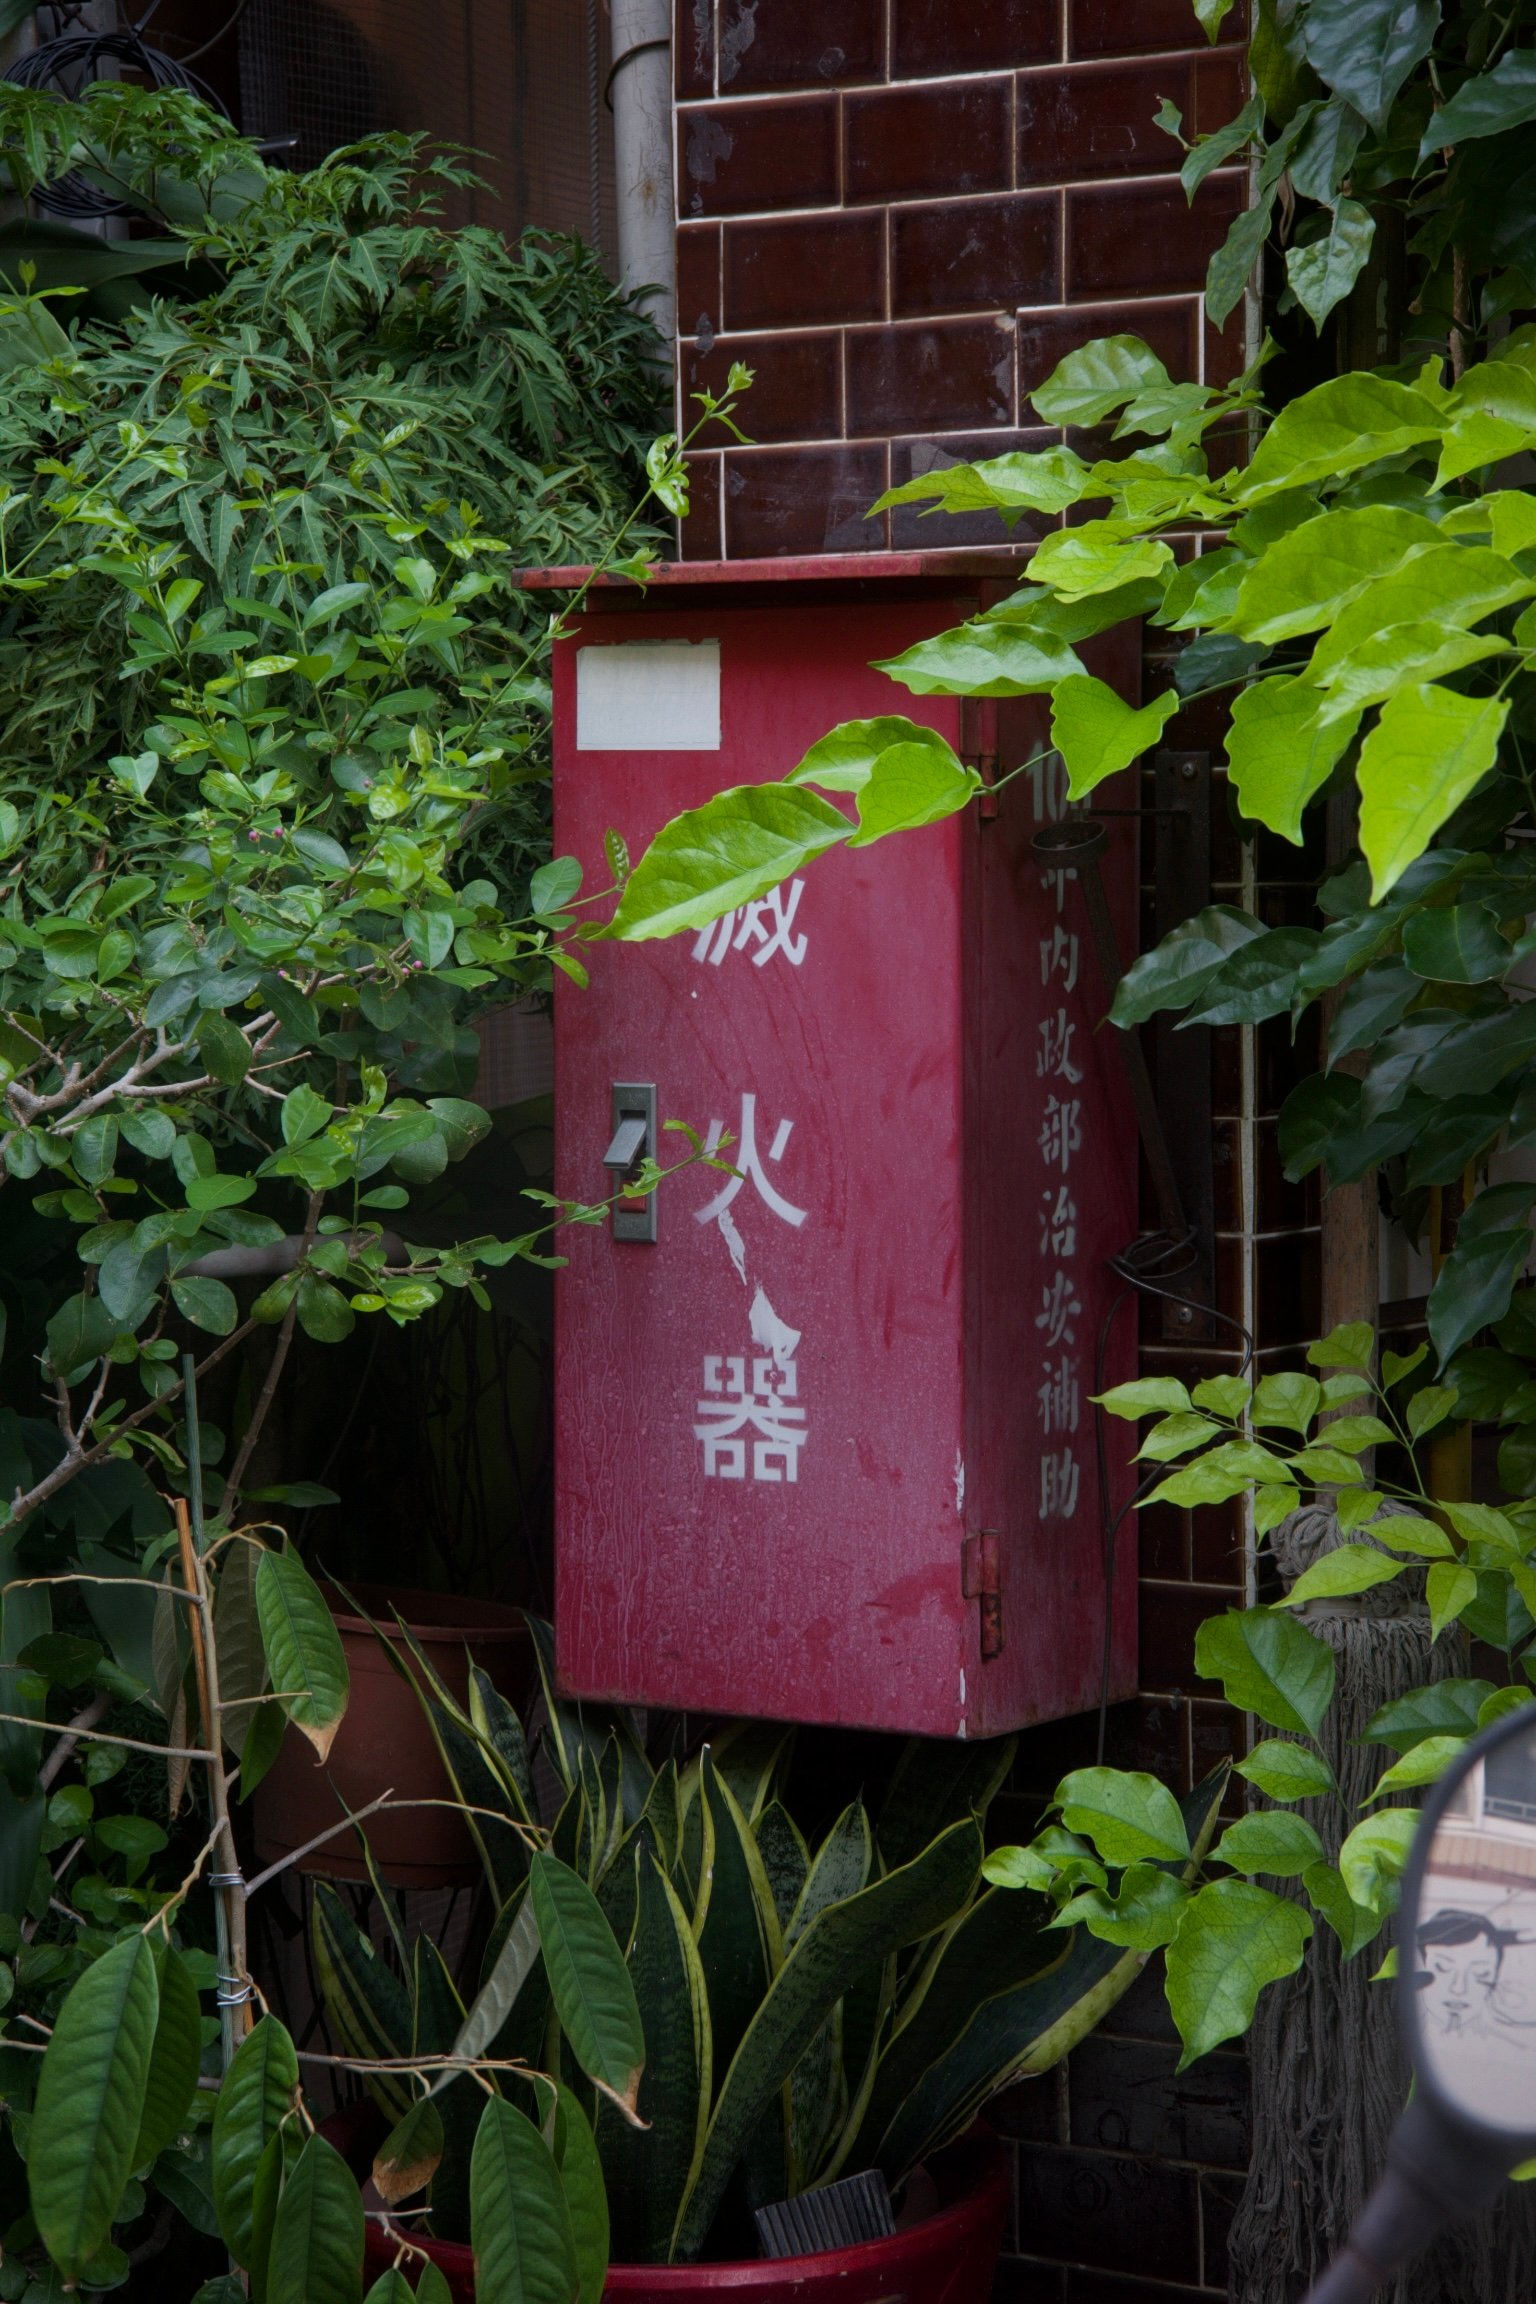 A fire extinguisher partially covered by trees and plants.